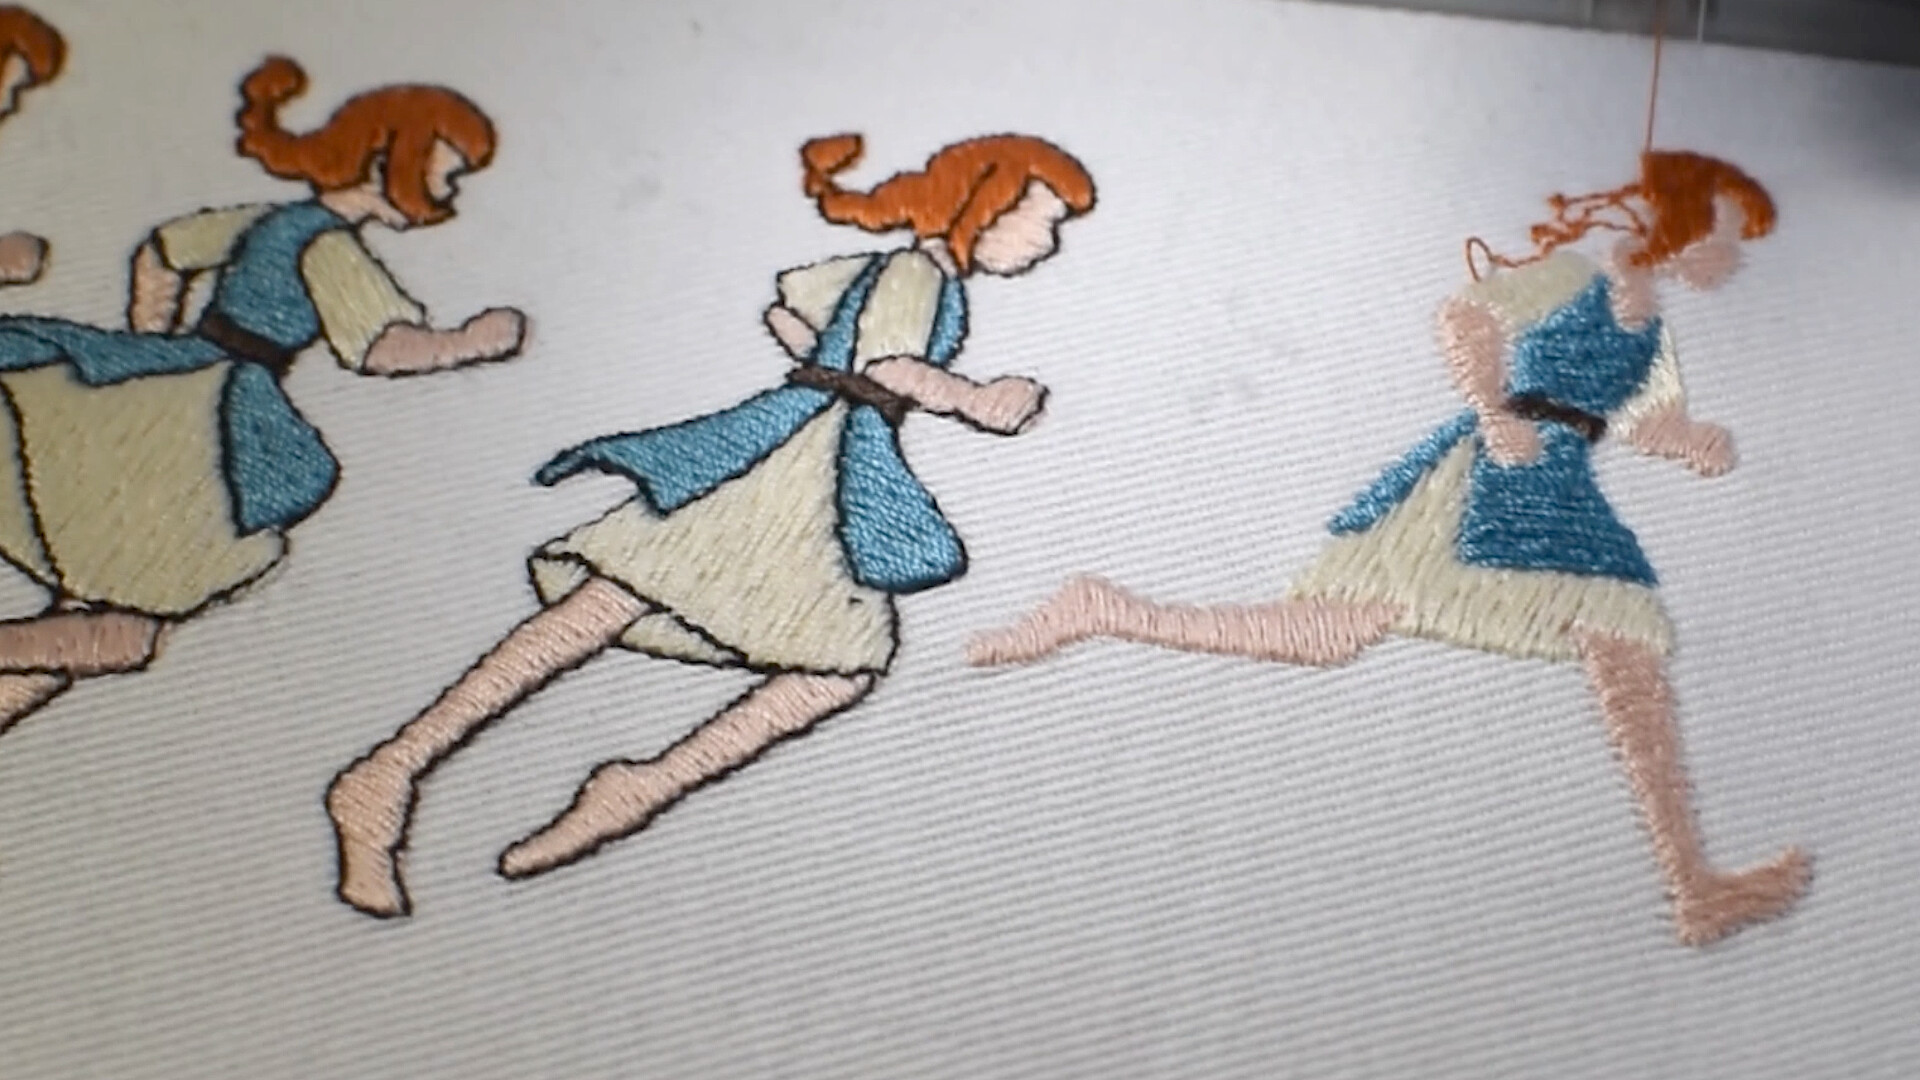  This windswept platformer is going to have entirely embroidered character art 